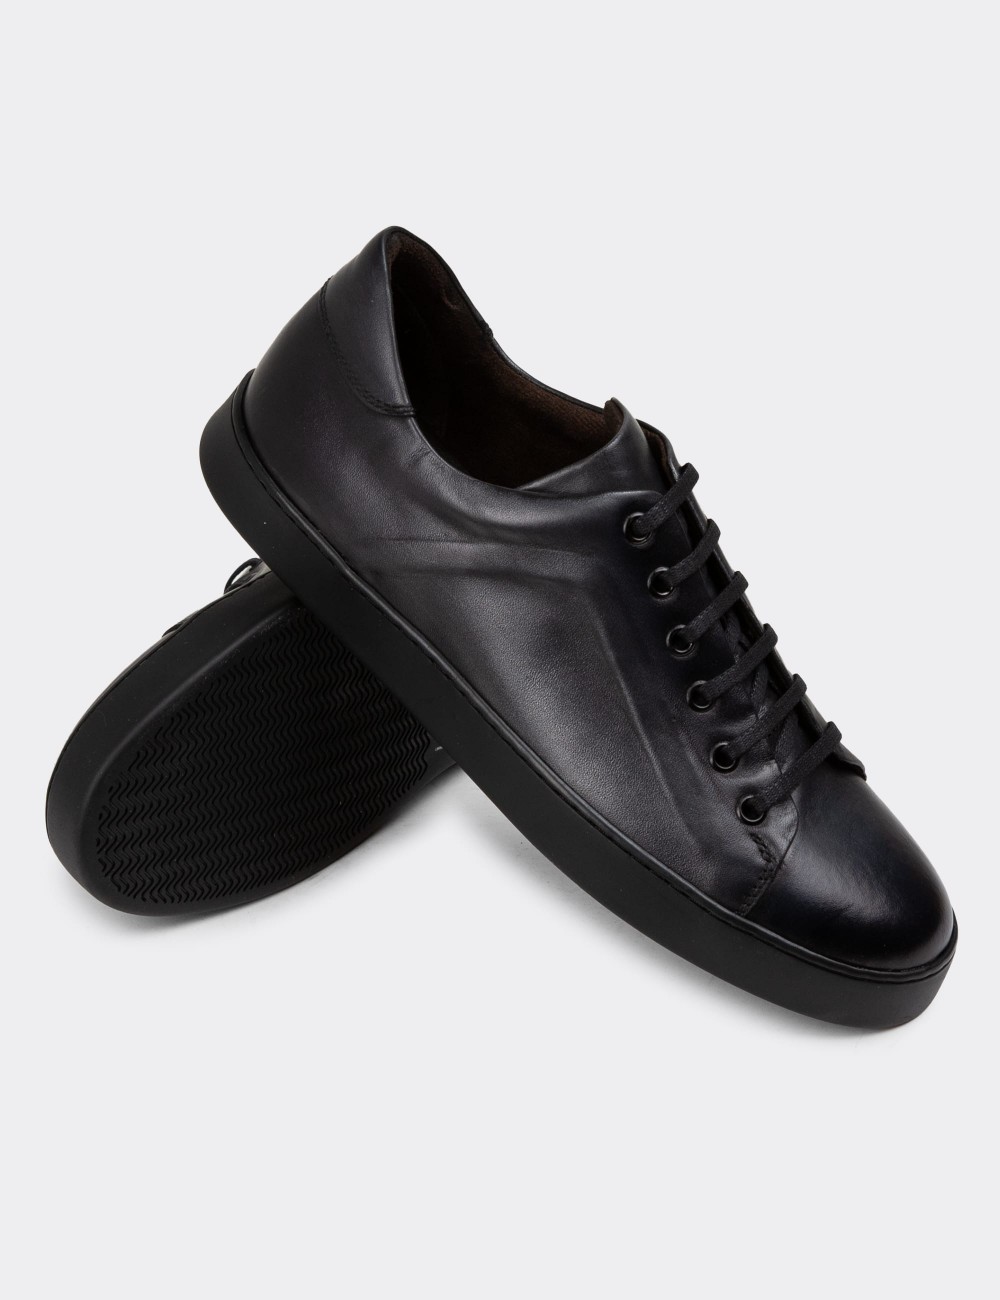 Anthracite Leather Sneakers - 01956MANTC01